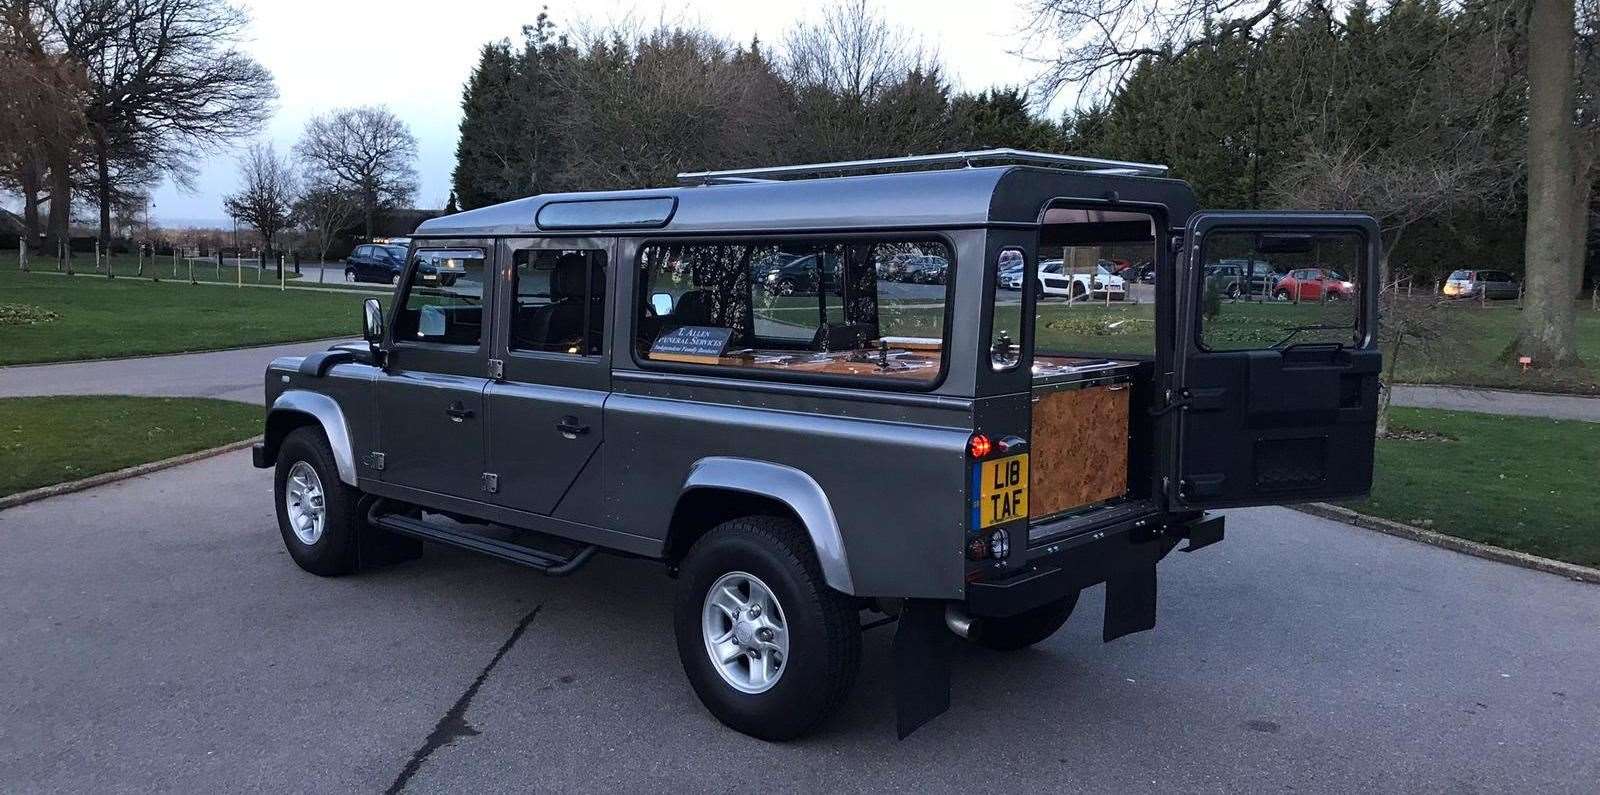 The Land Rover hearse is a stand alone vehicle, ideal for those who had a love of the outdoors and adventure, or those just looking for something a little different.